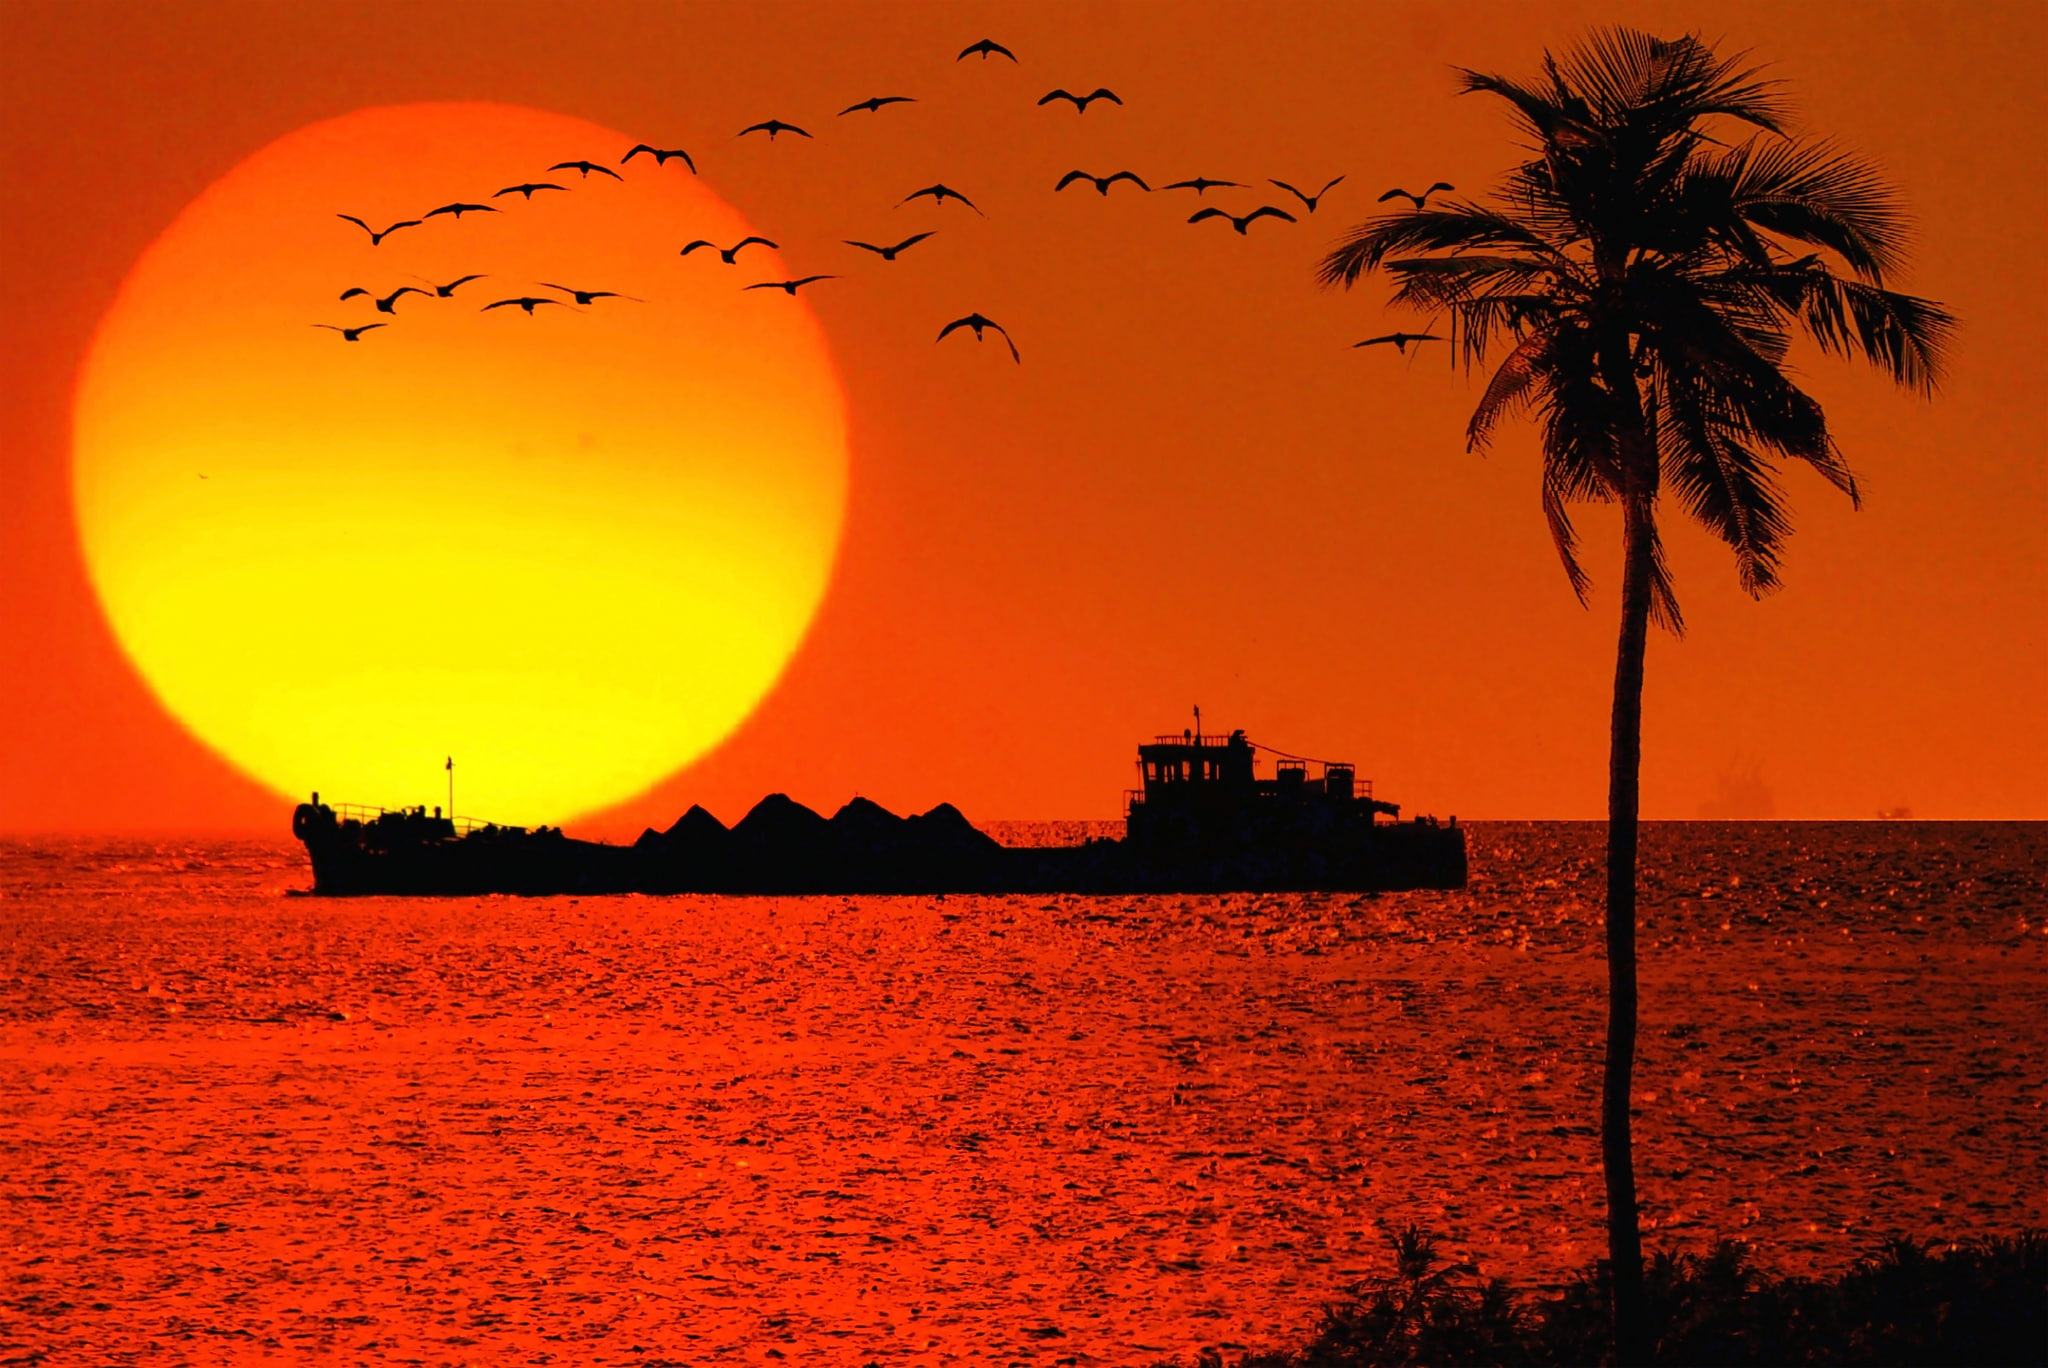 silhouette photo of flying birds, coconut tree, and ship during golden hour